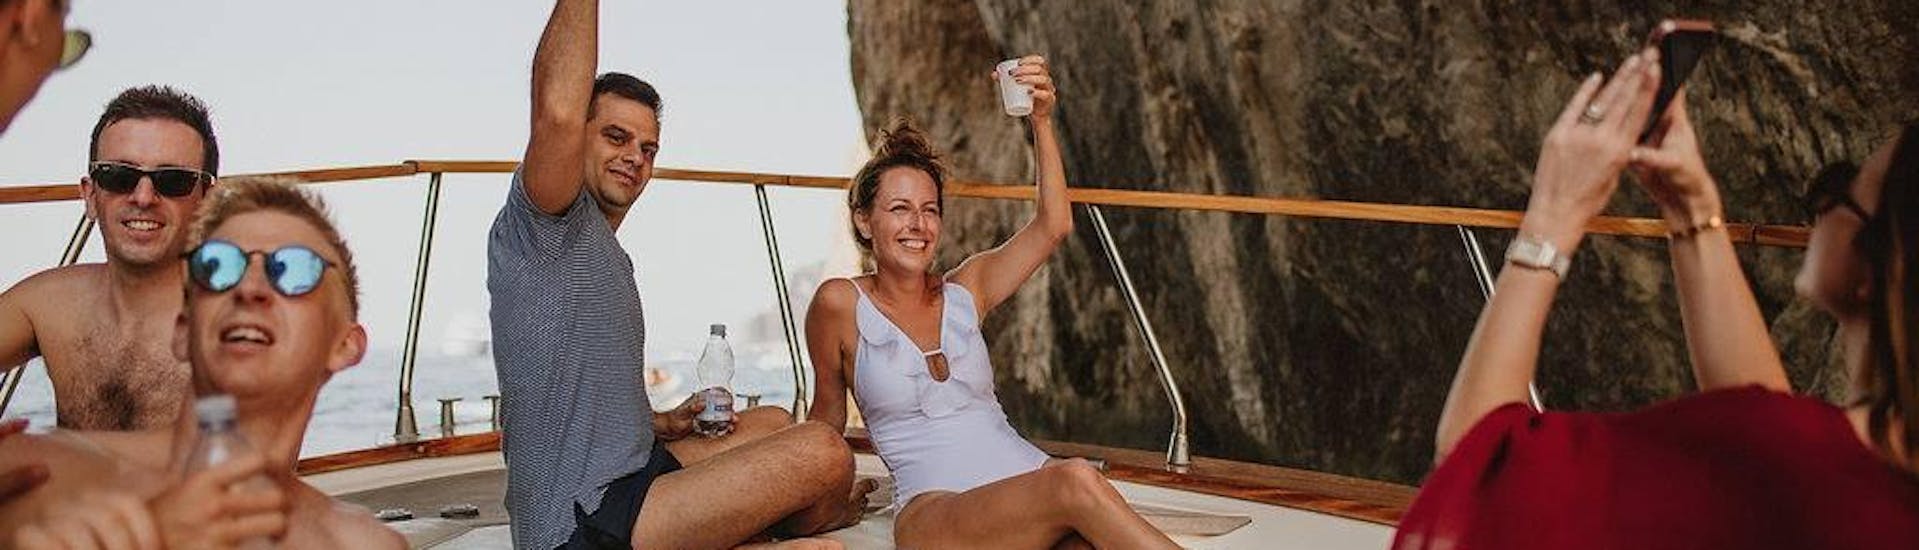 People laying on a boat holding drink and cheering during Private Boat Trip around the Island of Capri with Capitano Ago Costiera Amalfitana.